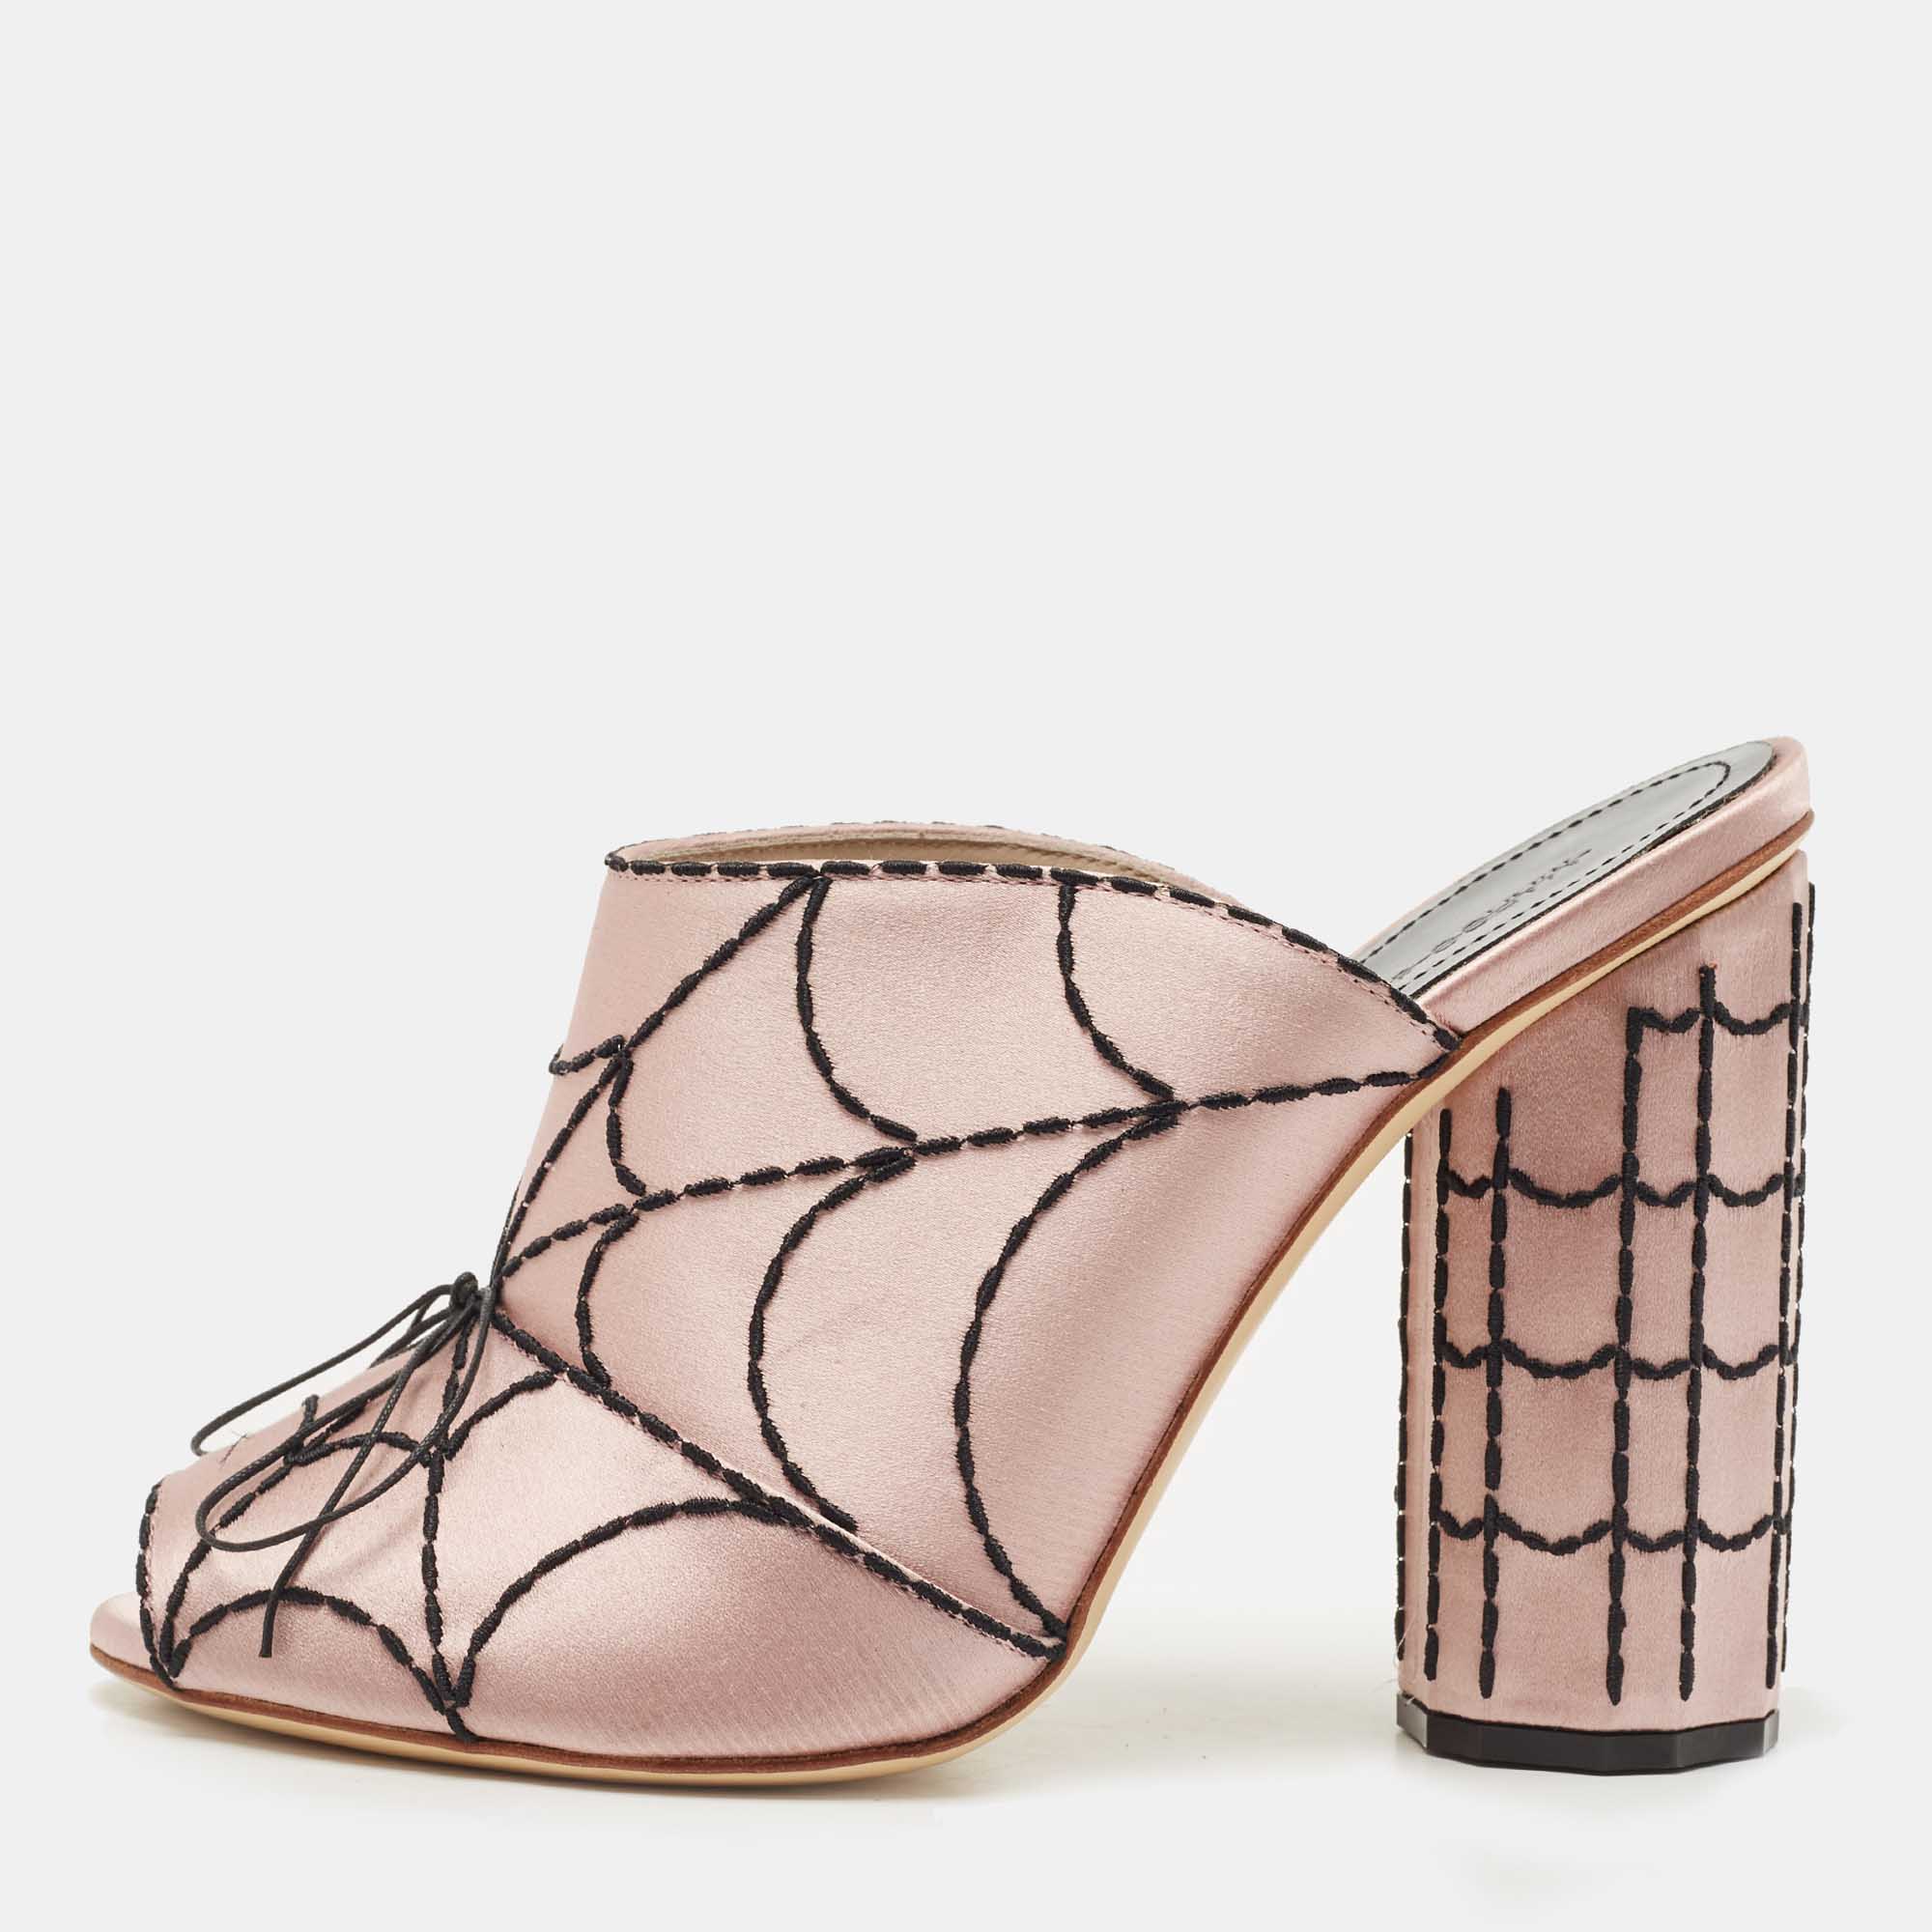 marco de vincenzo pink satin embroidered spider web mules size 39